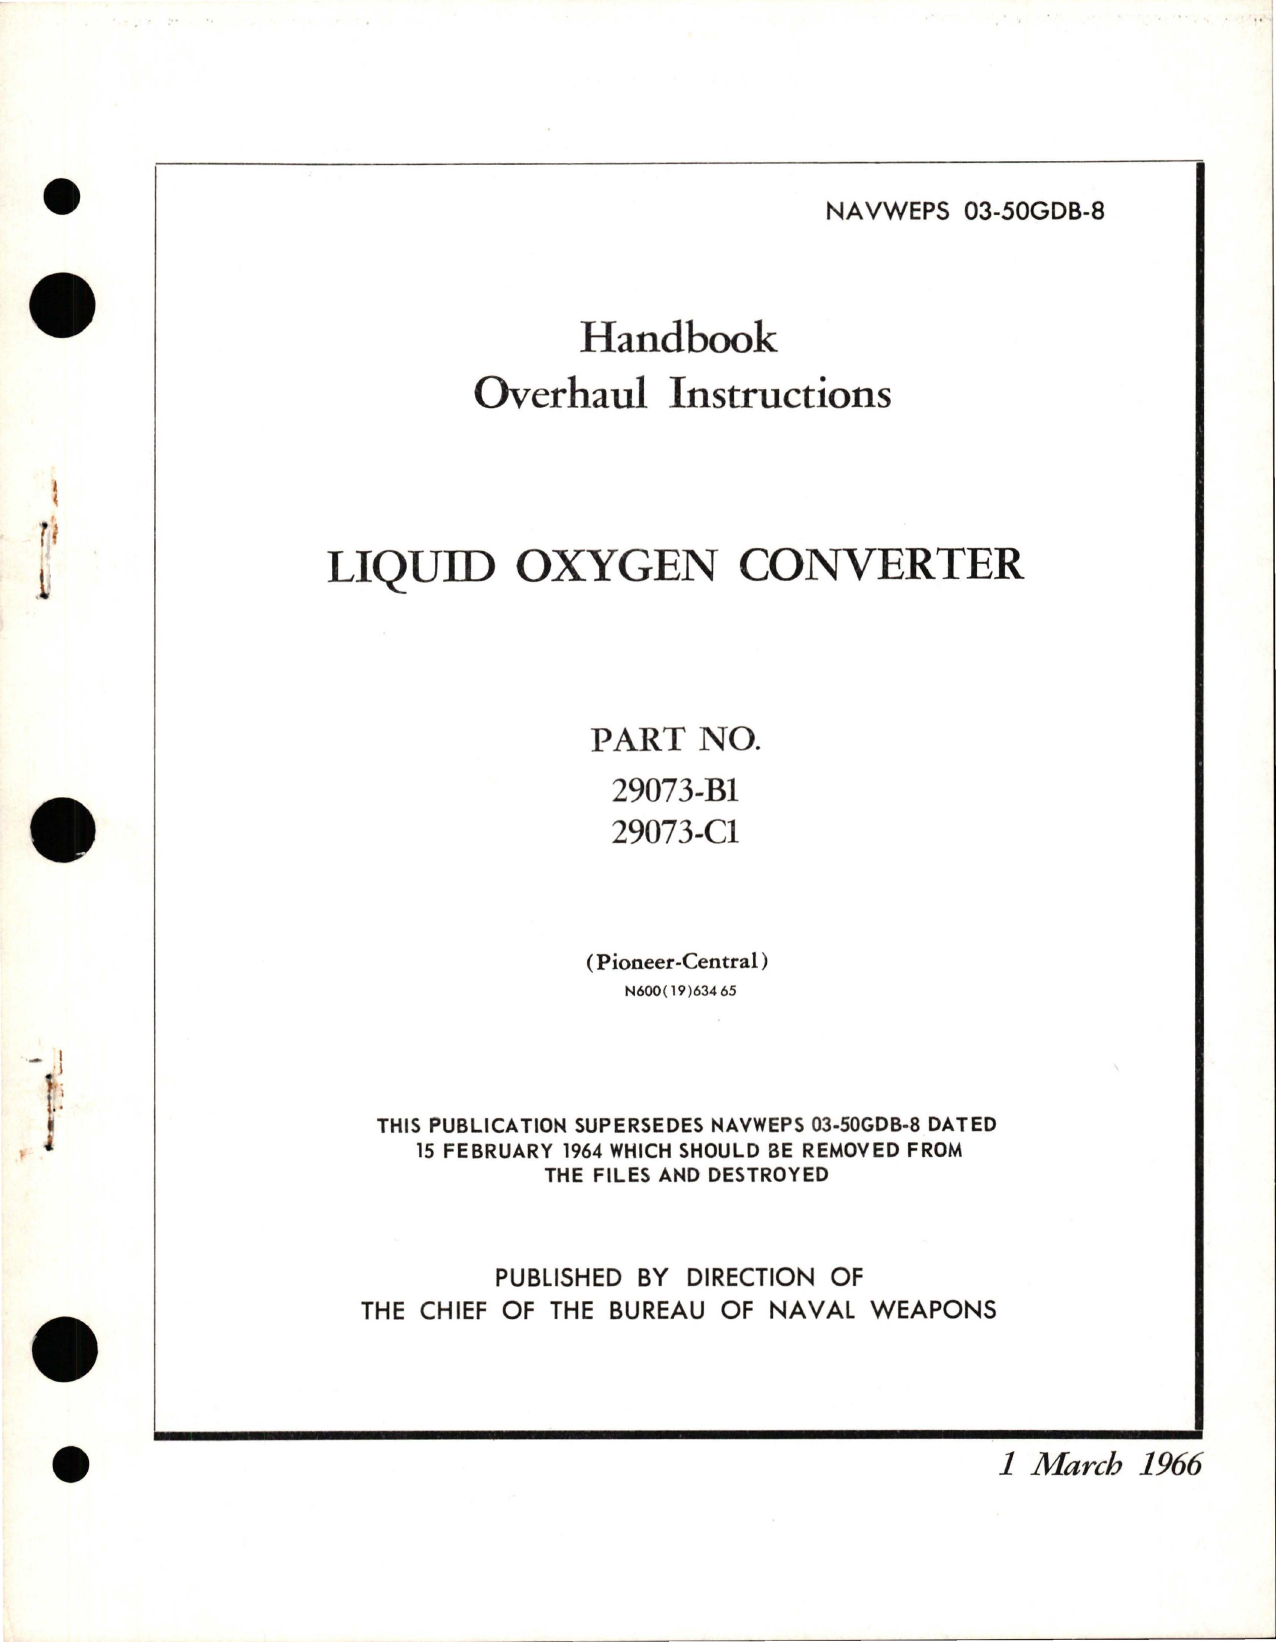 Sample page 1 from AirCorps Library document: Overhaul Instructions for Liquid Oxygen Converter - Part 29073-B1 and 29073-C1